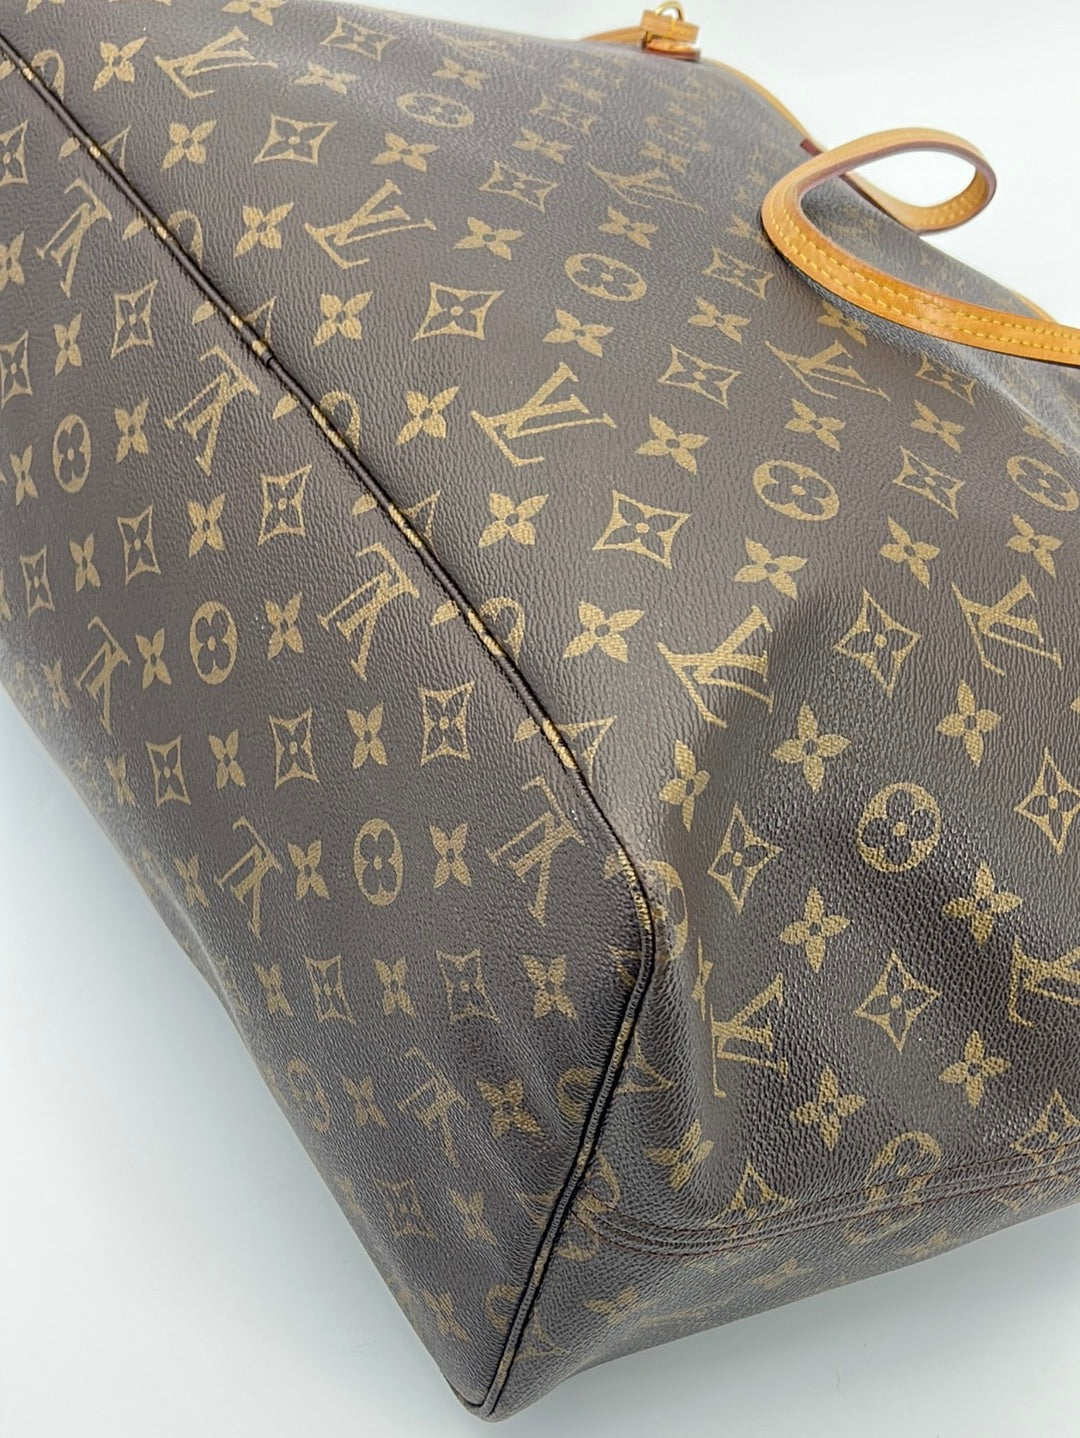 LOUIS VUITTON LV Used Tote Bag Neverfull PM Monogram Canvas M41000 #BY781 S